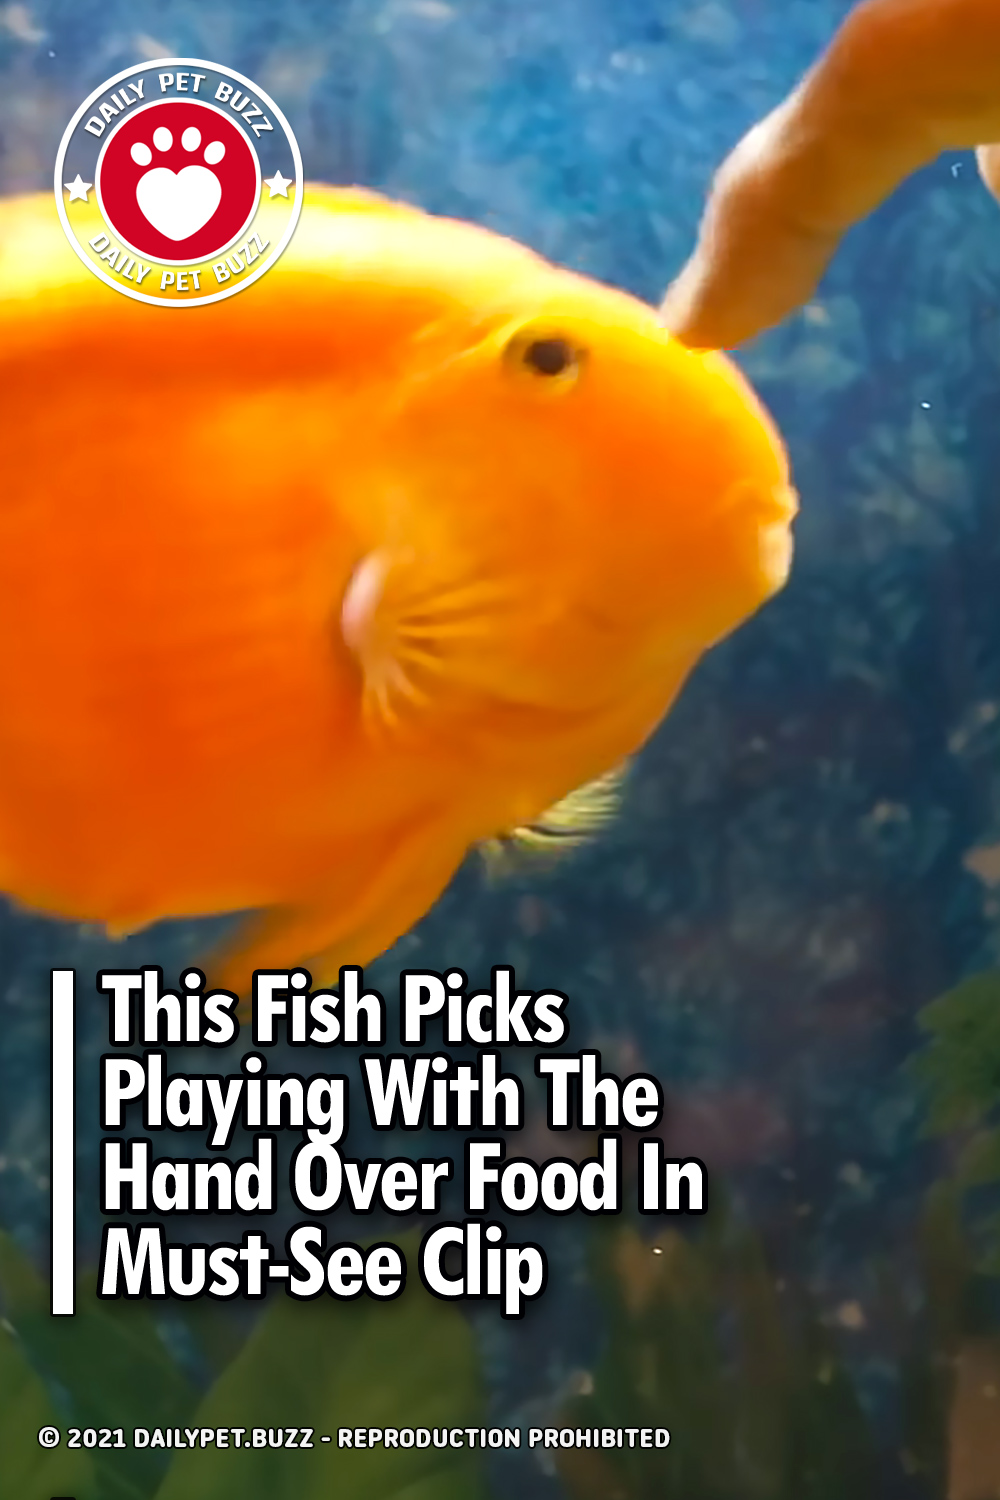 This Fish Picks Playing With The Hand Over Food In Must-See Clip